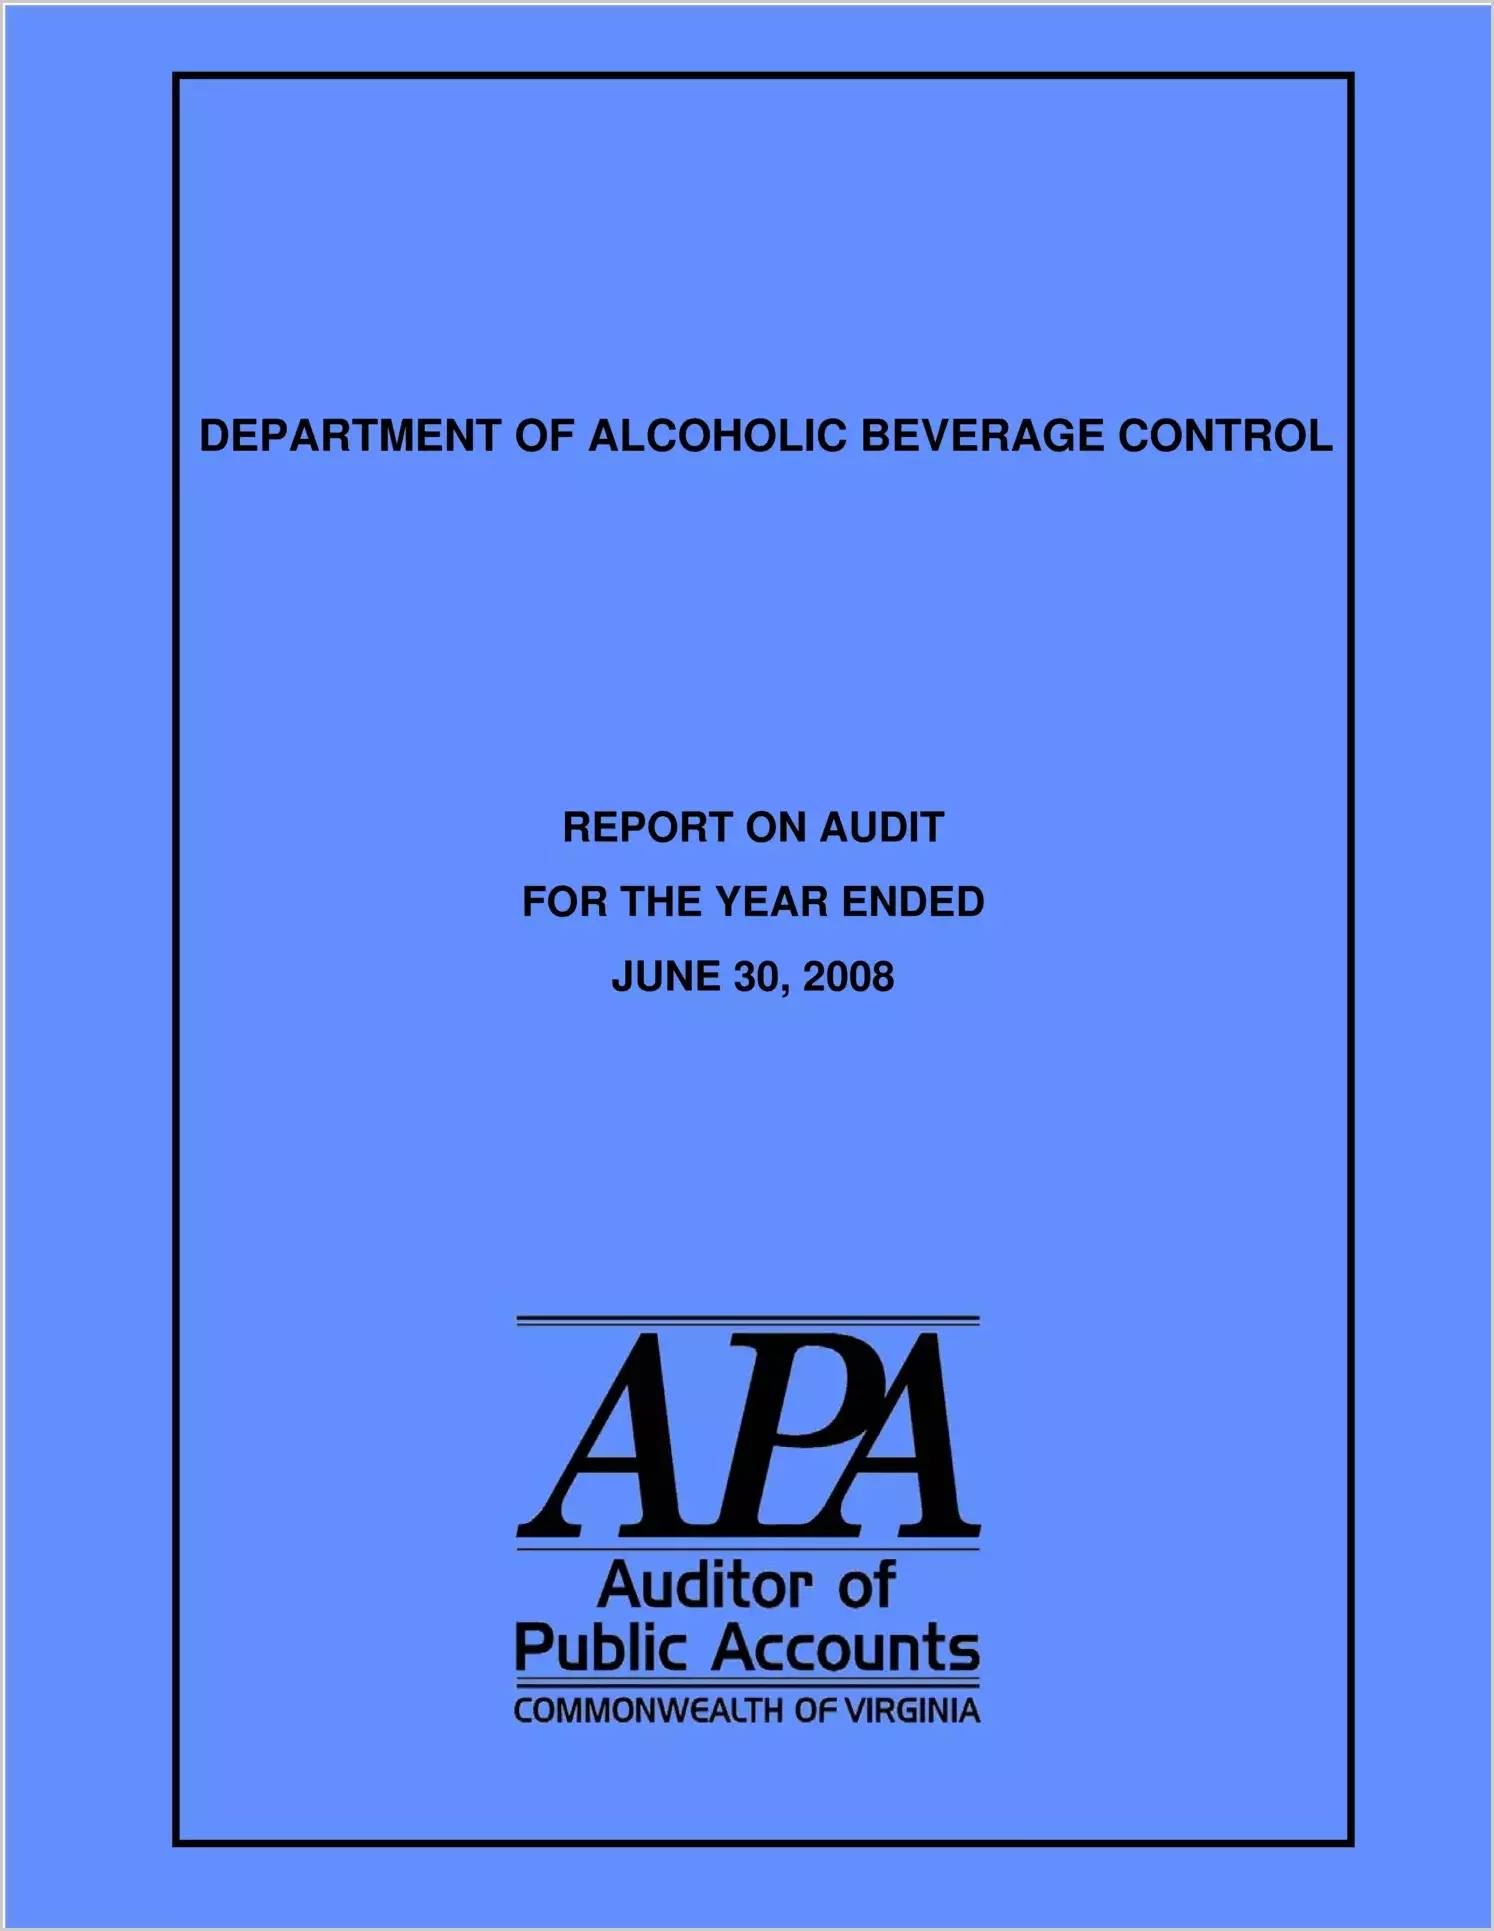 Department Of Alcoholic Beverage Control Report On Audit For The Year Ended June 30, 2008